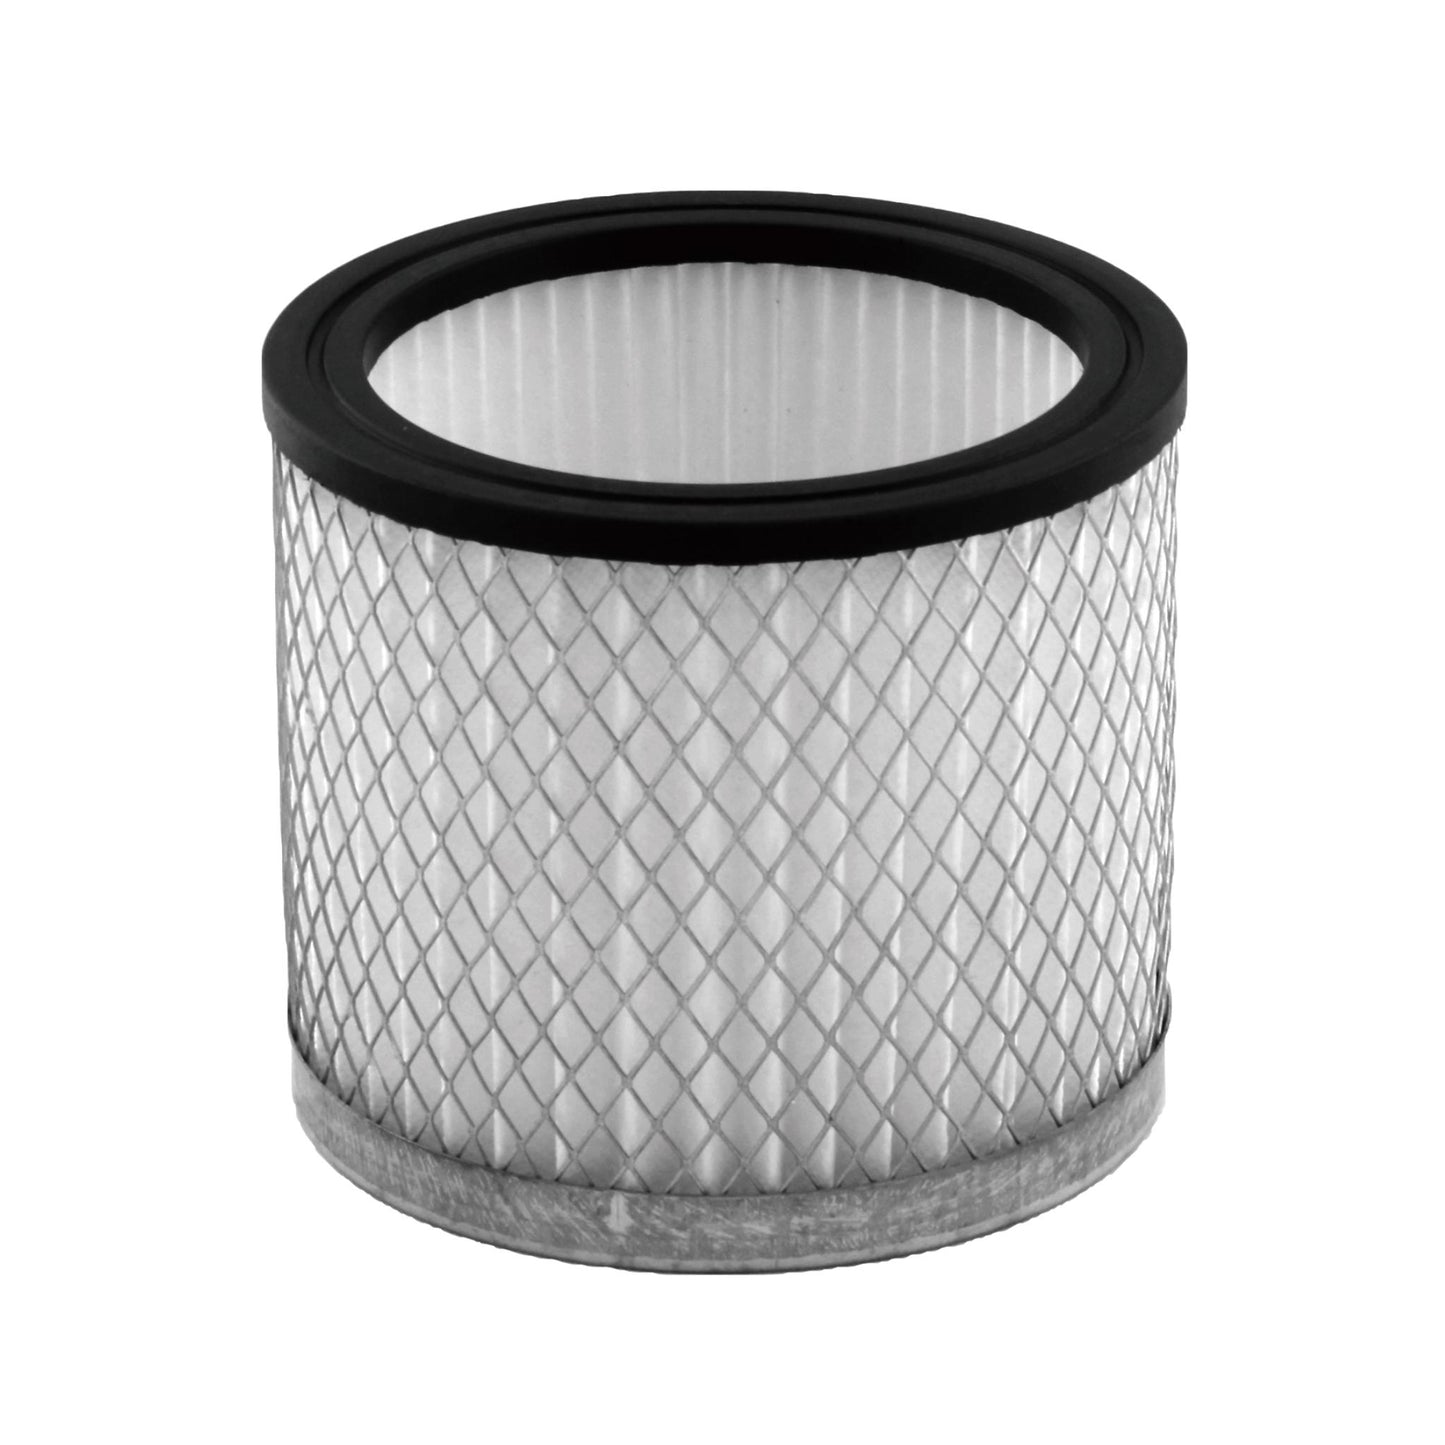 Replacement HEPA Air Filter for 18V Ash Vac - WPPO LLC Direct